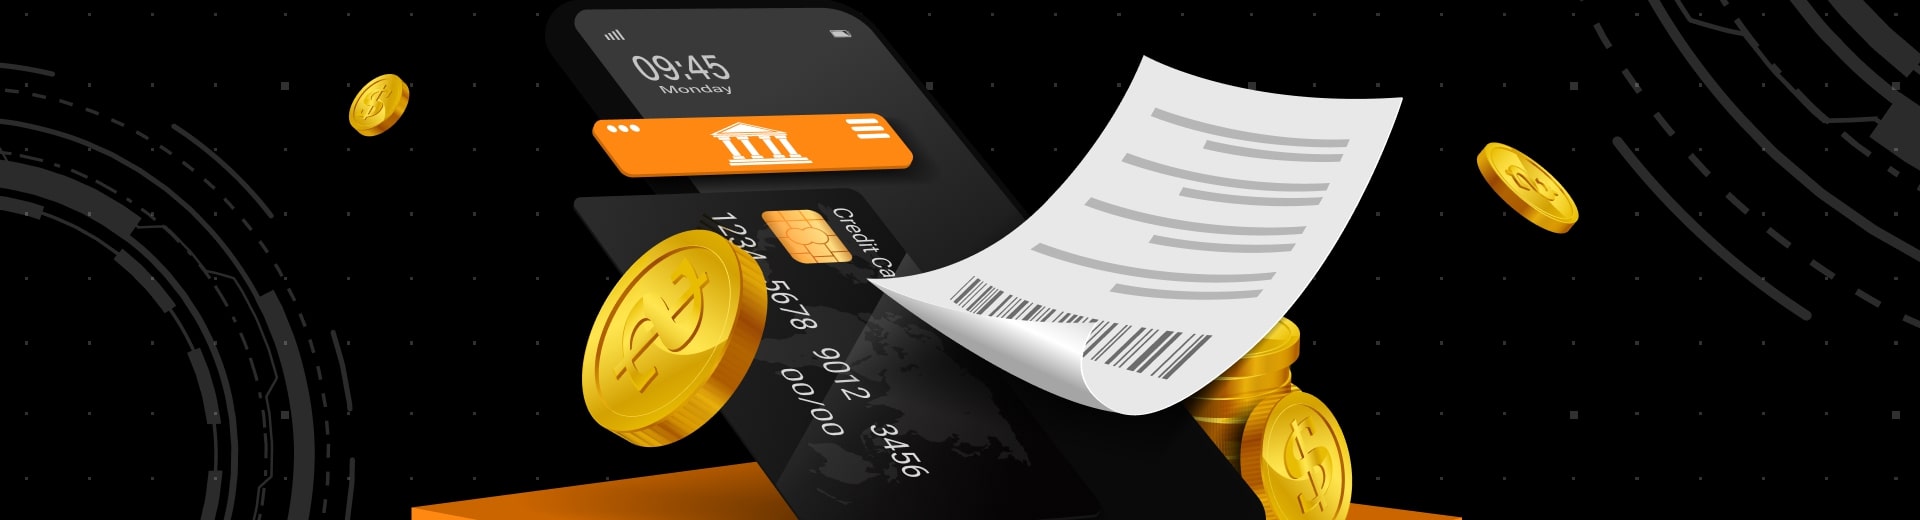 Payment System Integration in eCommerce